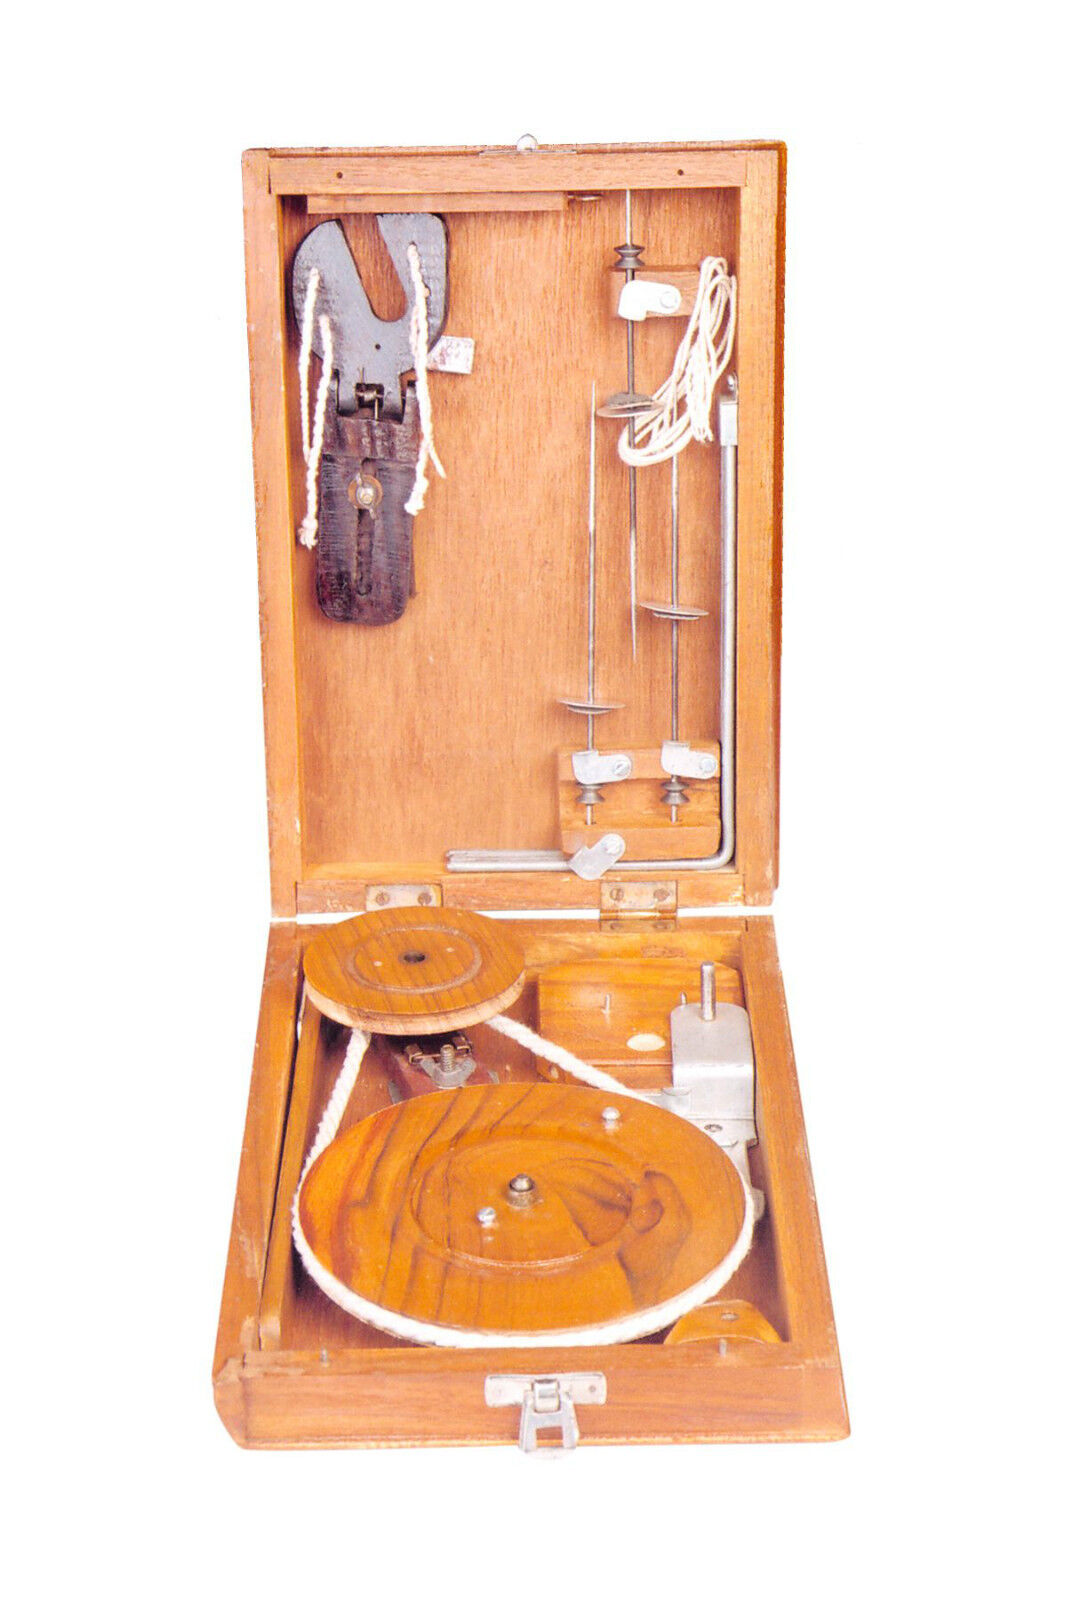 Book Charkha (Traditional) or spinning wheel crafted in India. New